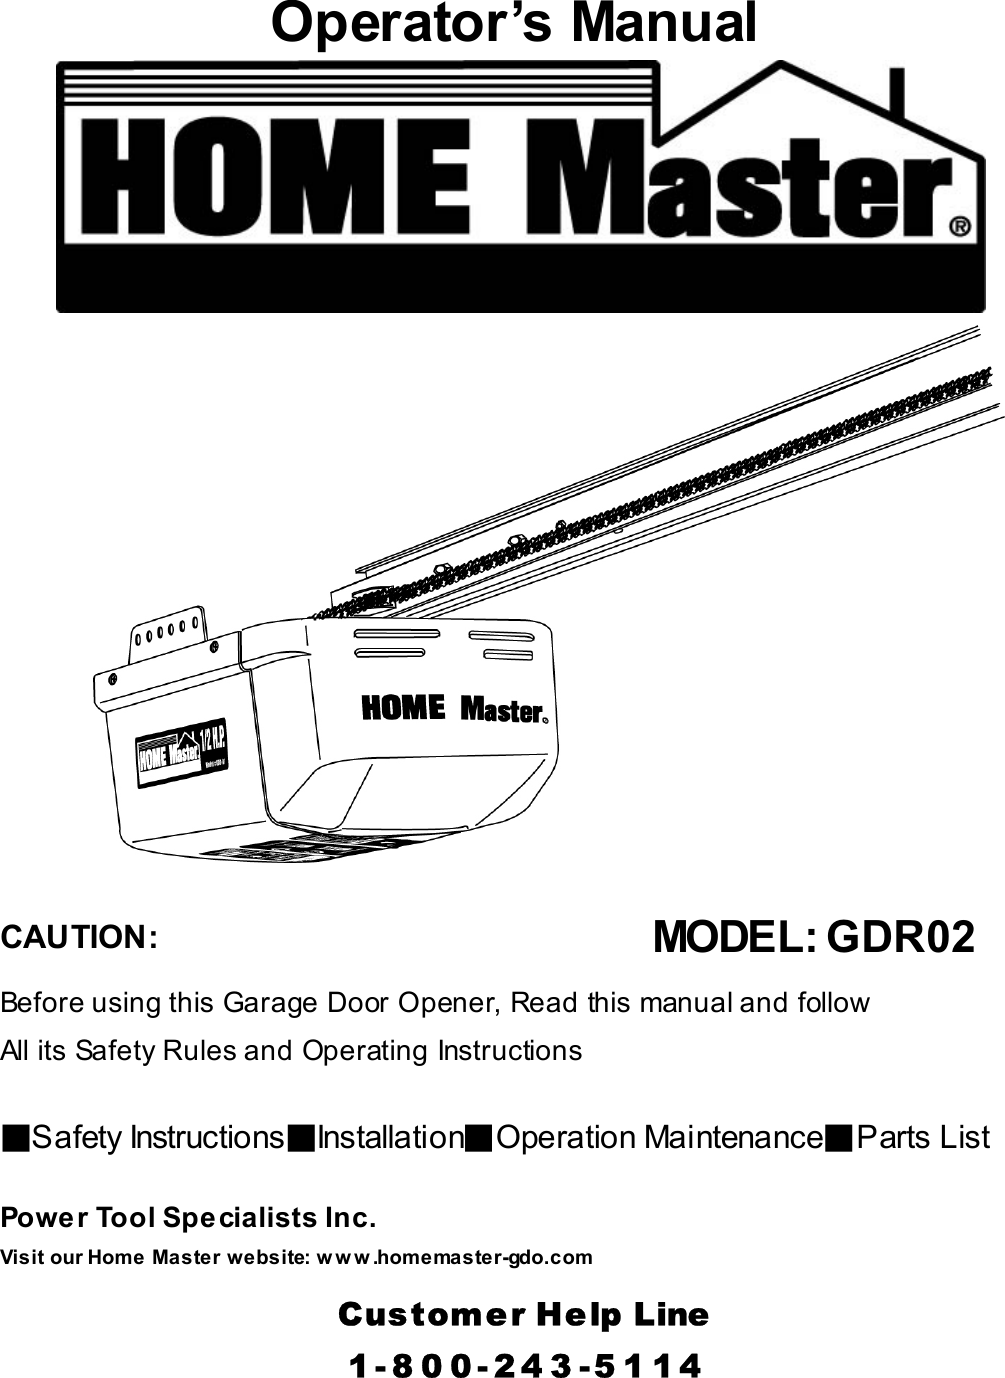 Operator’s Manual       GARAGE DOOR OPENER       CAUTION: Before using this Garage Door Opener, Read this manual and follow All its Safety Rules and Operating Instructions  ▓Safety Instructions▓Installation▓Operation Maintenance▓Parts List  Power Tool Specialists Inc. Visit our Home Master website: www.homemaster-gdo.com    Customer Help Line1-800-243-5114 MODEL: GDR02